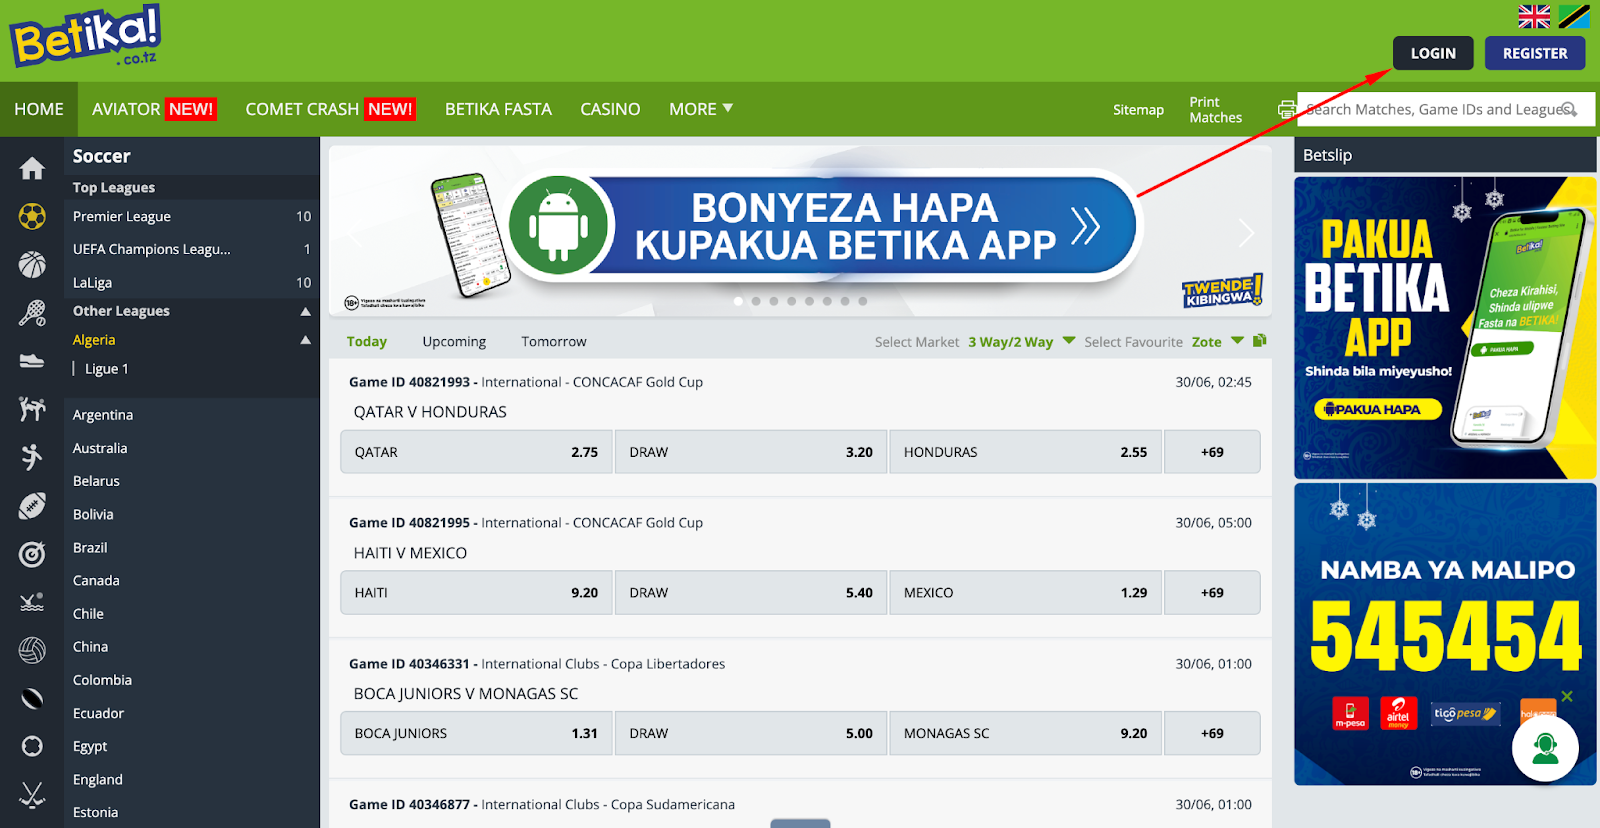 Picture with  arrow pointing at the Login button to login for a Betika Tanzania